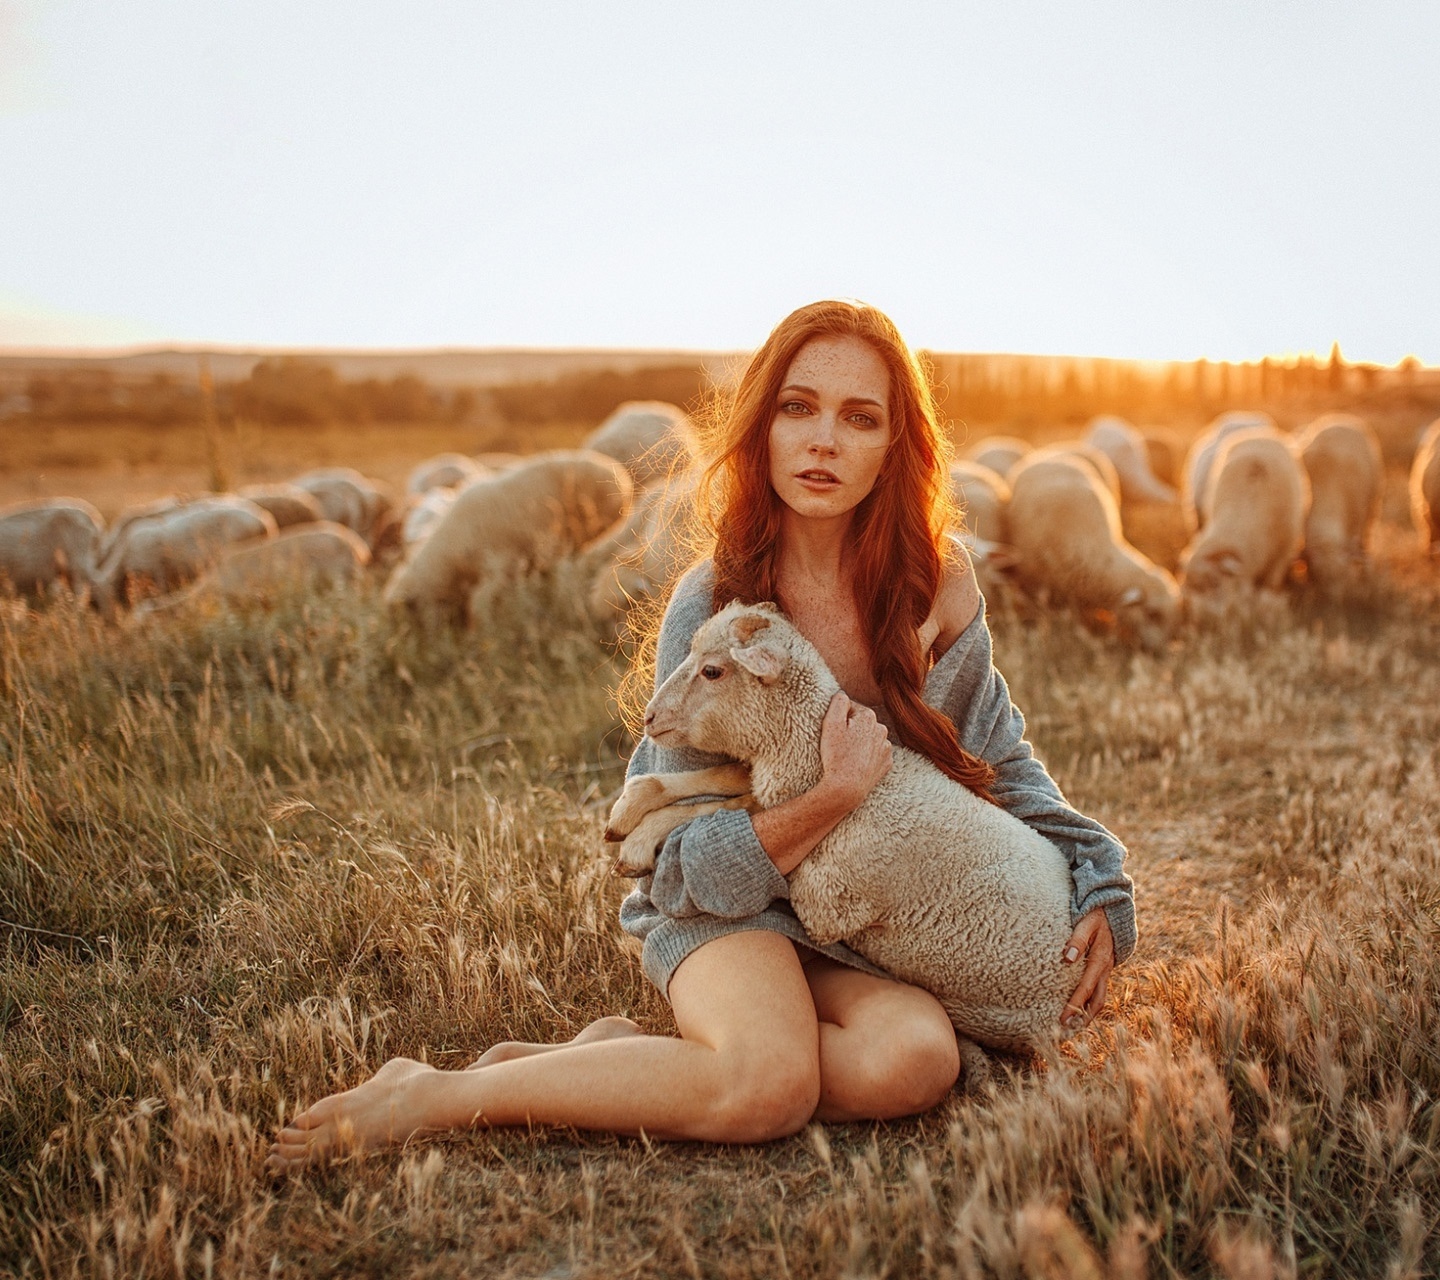 Girl with Sheep wallpaper 1440x1280